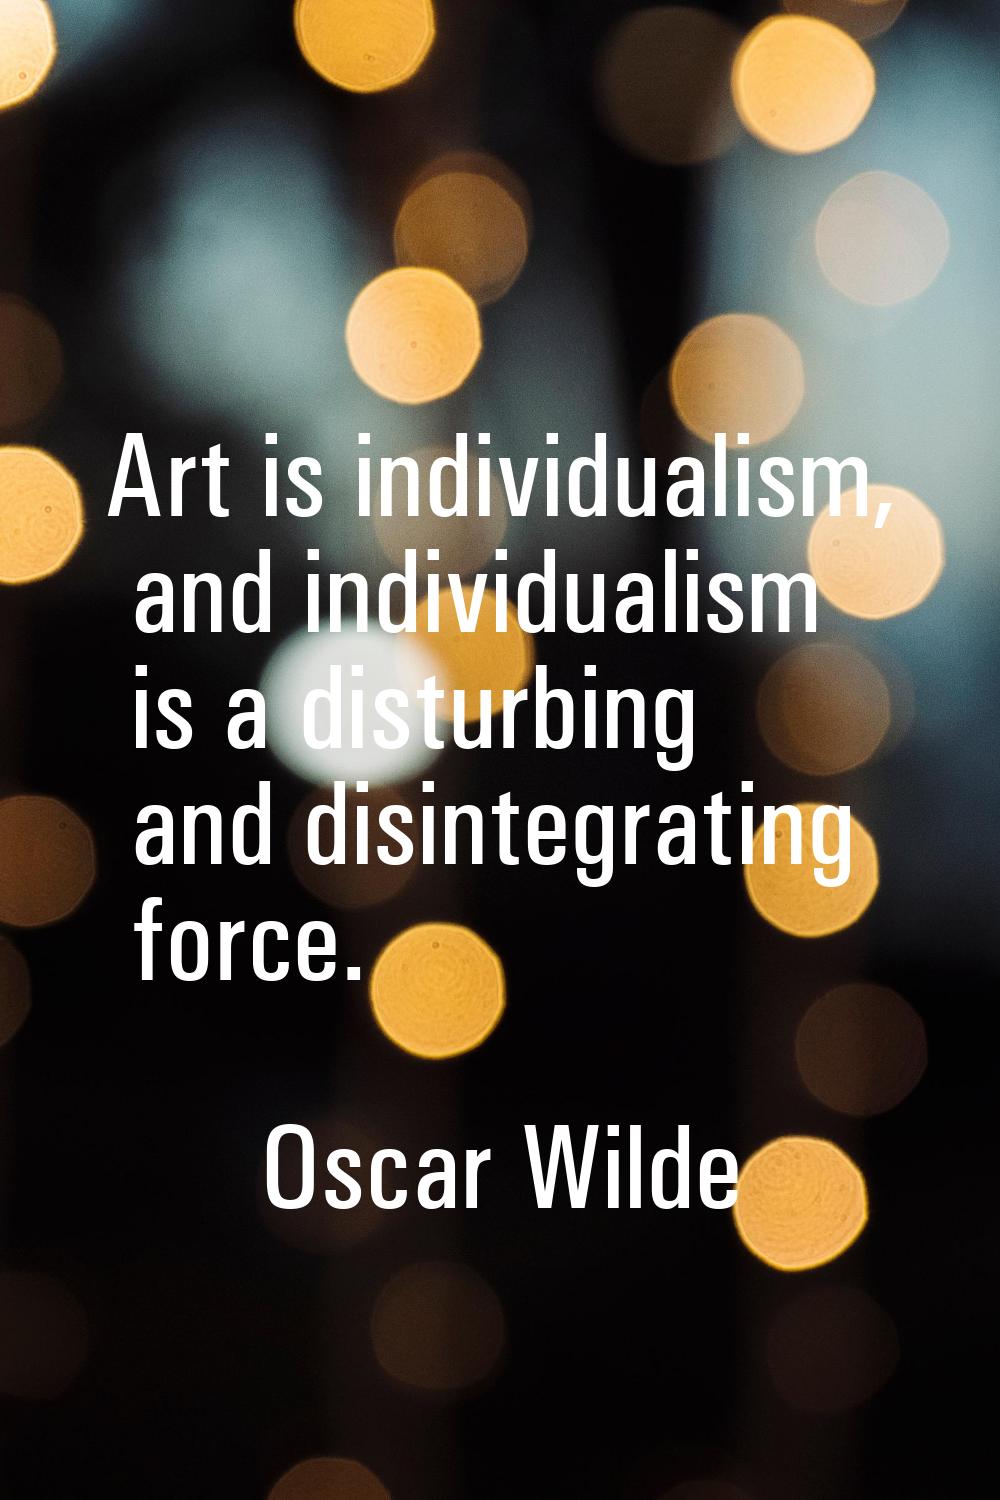 Art is individualism, and individualism is a disturbing and disintegrating force.